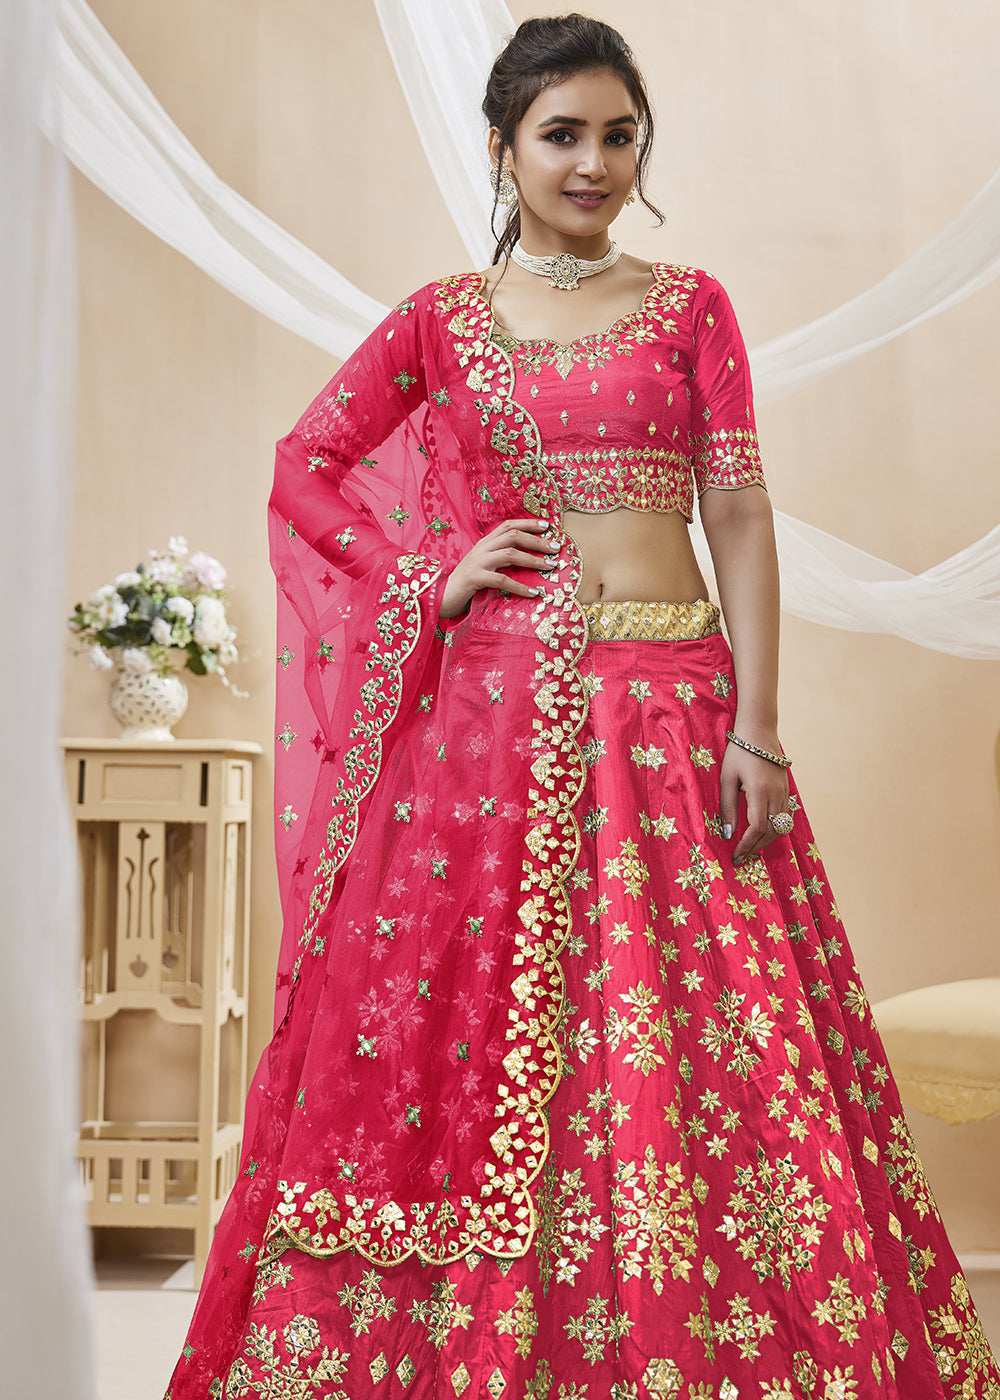 Buy Now Lovely Pink Art Silk Embroidered Reception Wear Lehenga Choli Online in USA, UK, Canada & Worldwide at Empress Clothing.